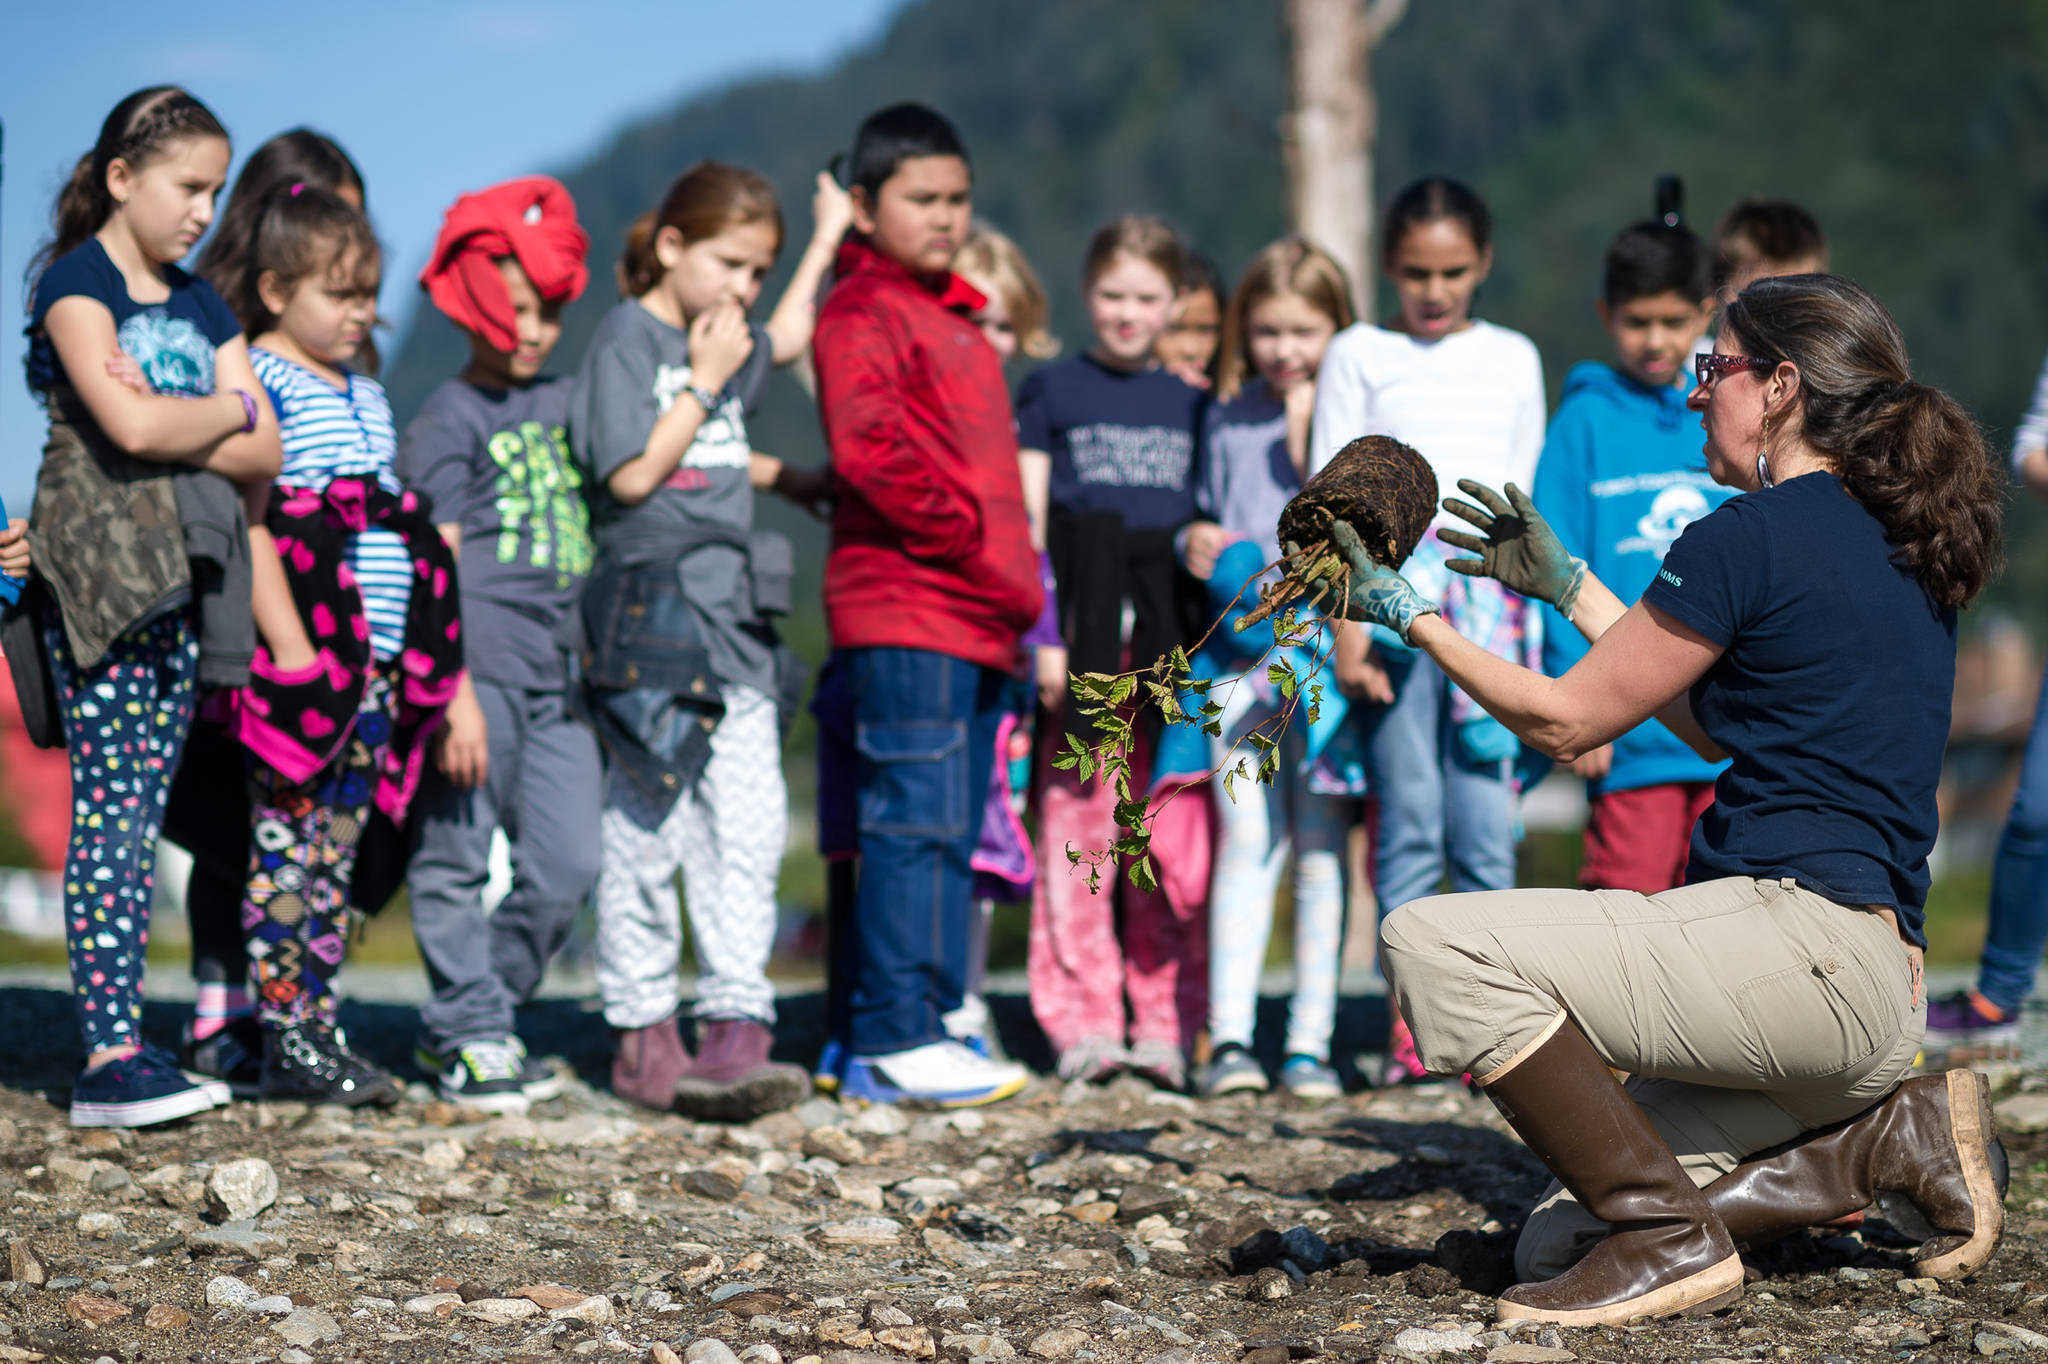 Michele Elfers, Chief Landscape Architect for the city, instructs fourth-grade students from Harborview Elementary School on how to plant salmonberries on a newly created island next to the Seawalk on Tuesday, Sept. 5, 2017. Harborview students will get a chance to plant 300 native species on the island over the next week to transform the area into habitat for birds. (Michael Penn | Juneau Empire)